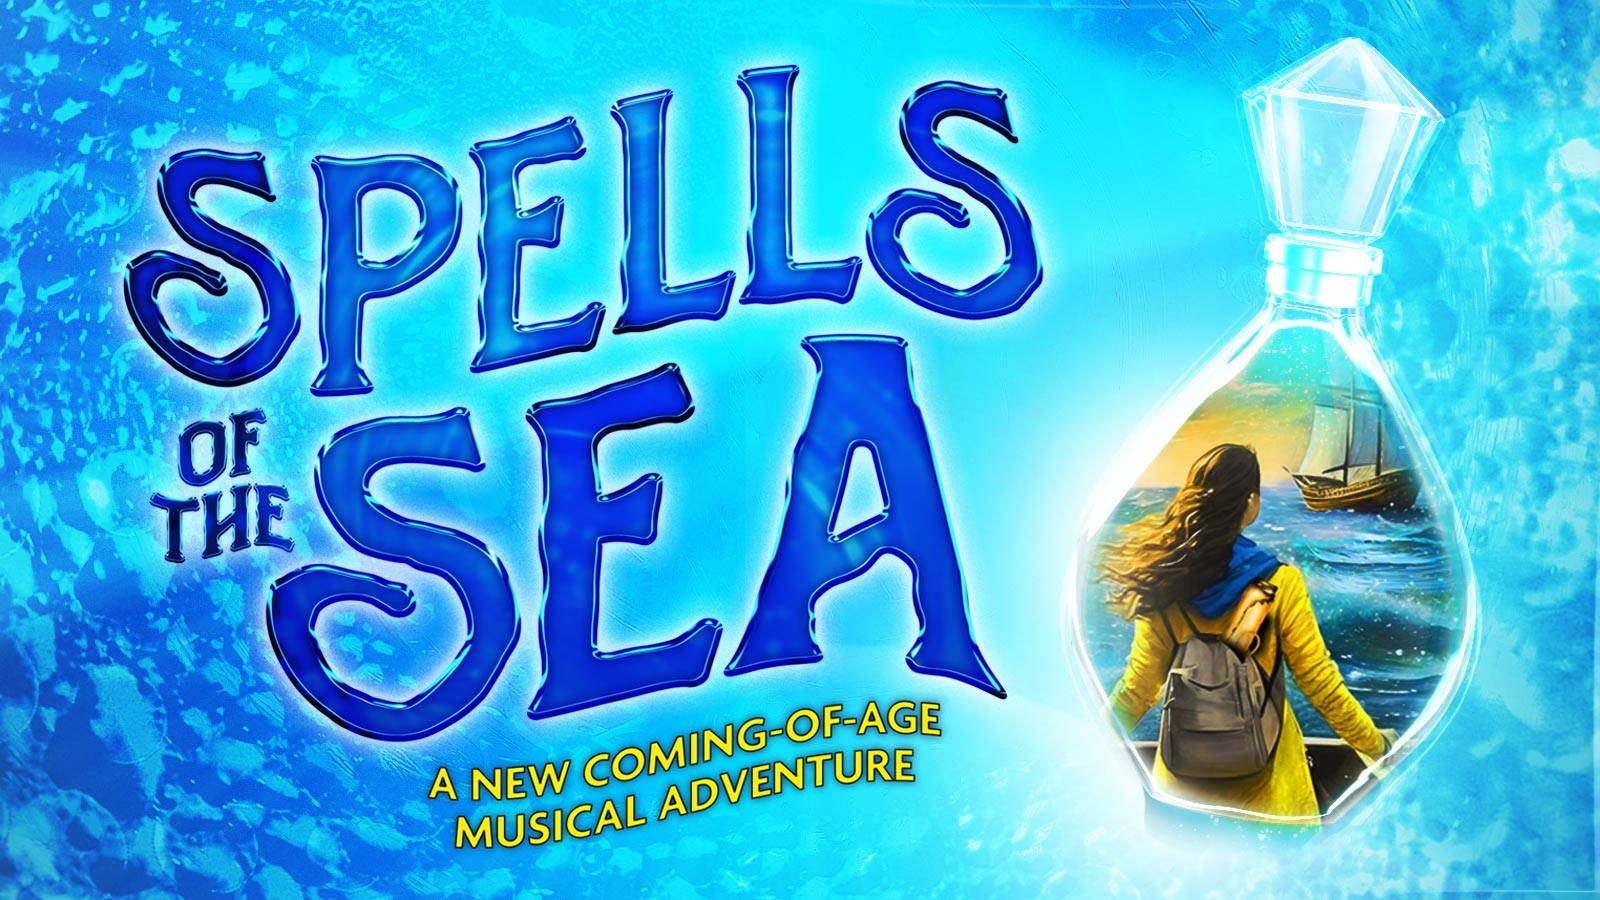 Spells of the Sea logo on water background with artistic rendering of a glass container containing a girl in a yellow rain jacket